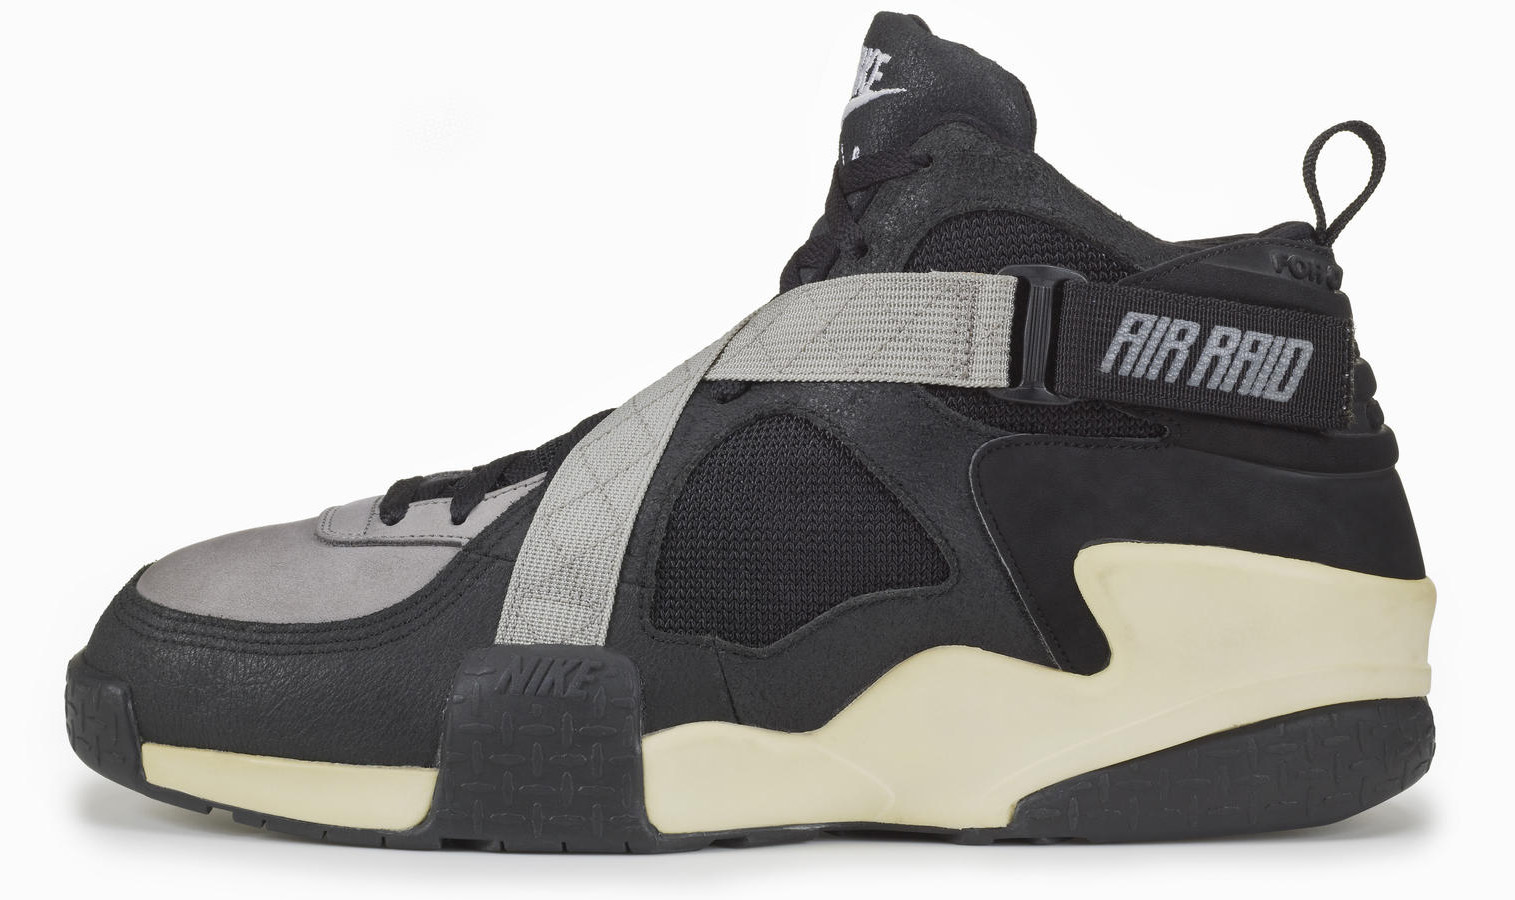 Thesneakerfirm - The FOG x Nike Air Raid Fossil Black is available again  with free shipping Buy Here